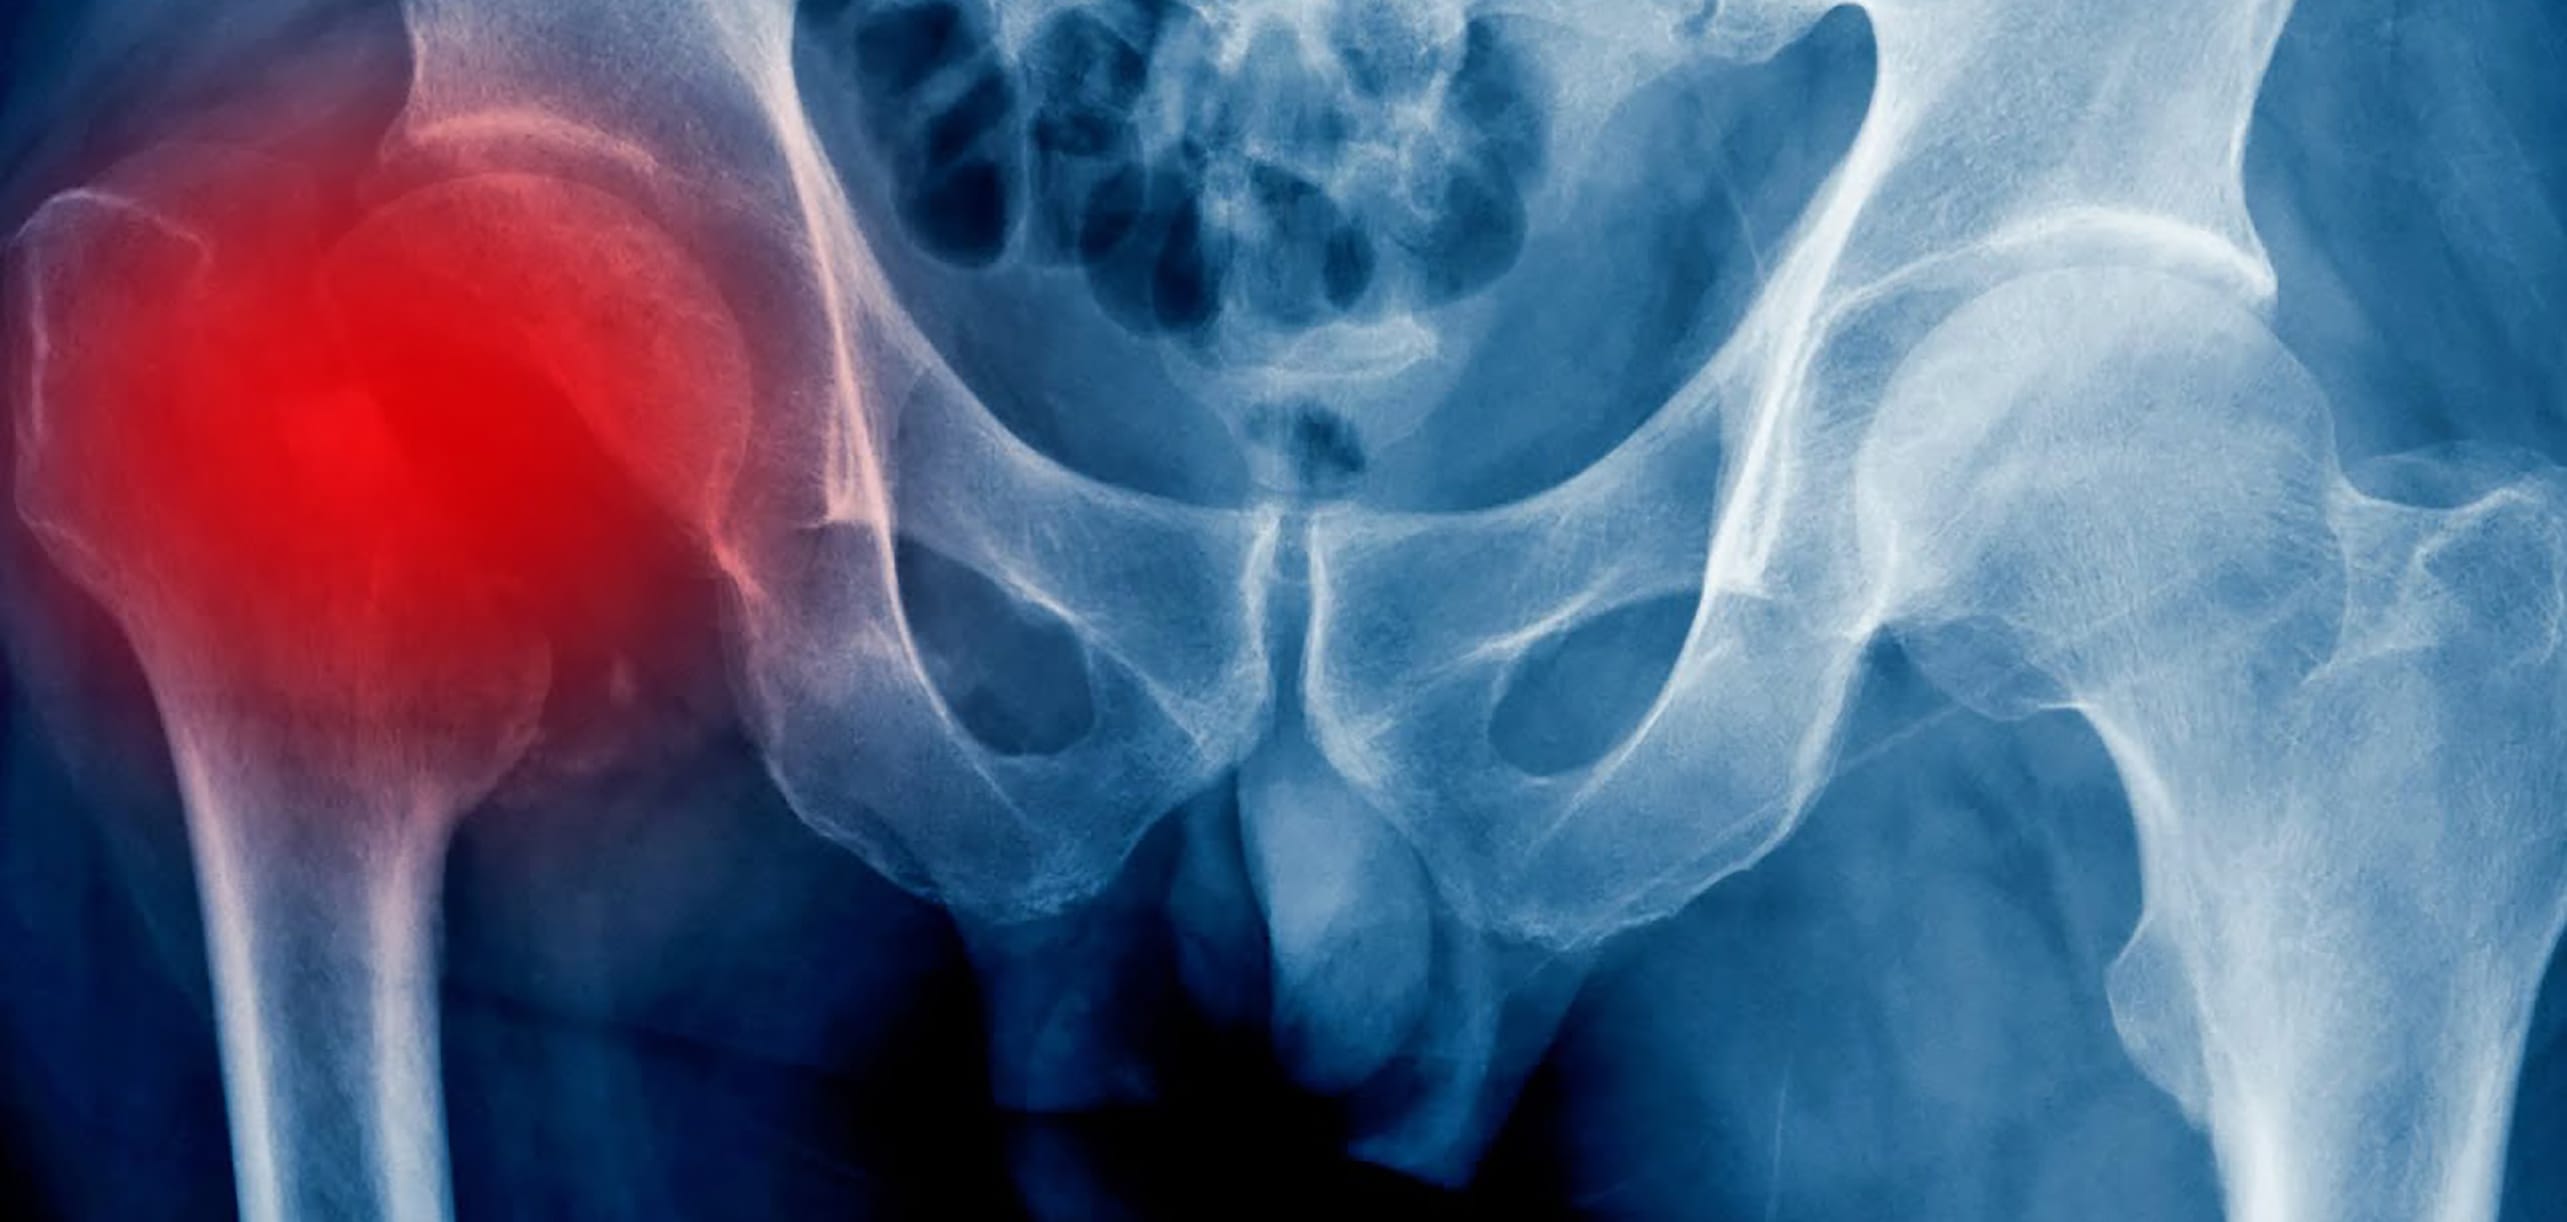 An X-ray image of a pelvis and upper femurs with a deep red circle overlaid on the left hip joint